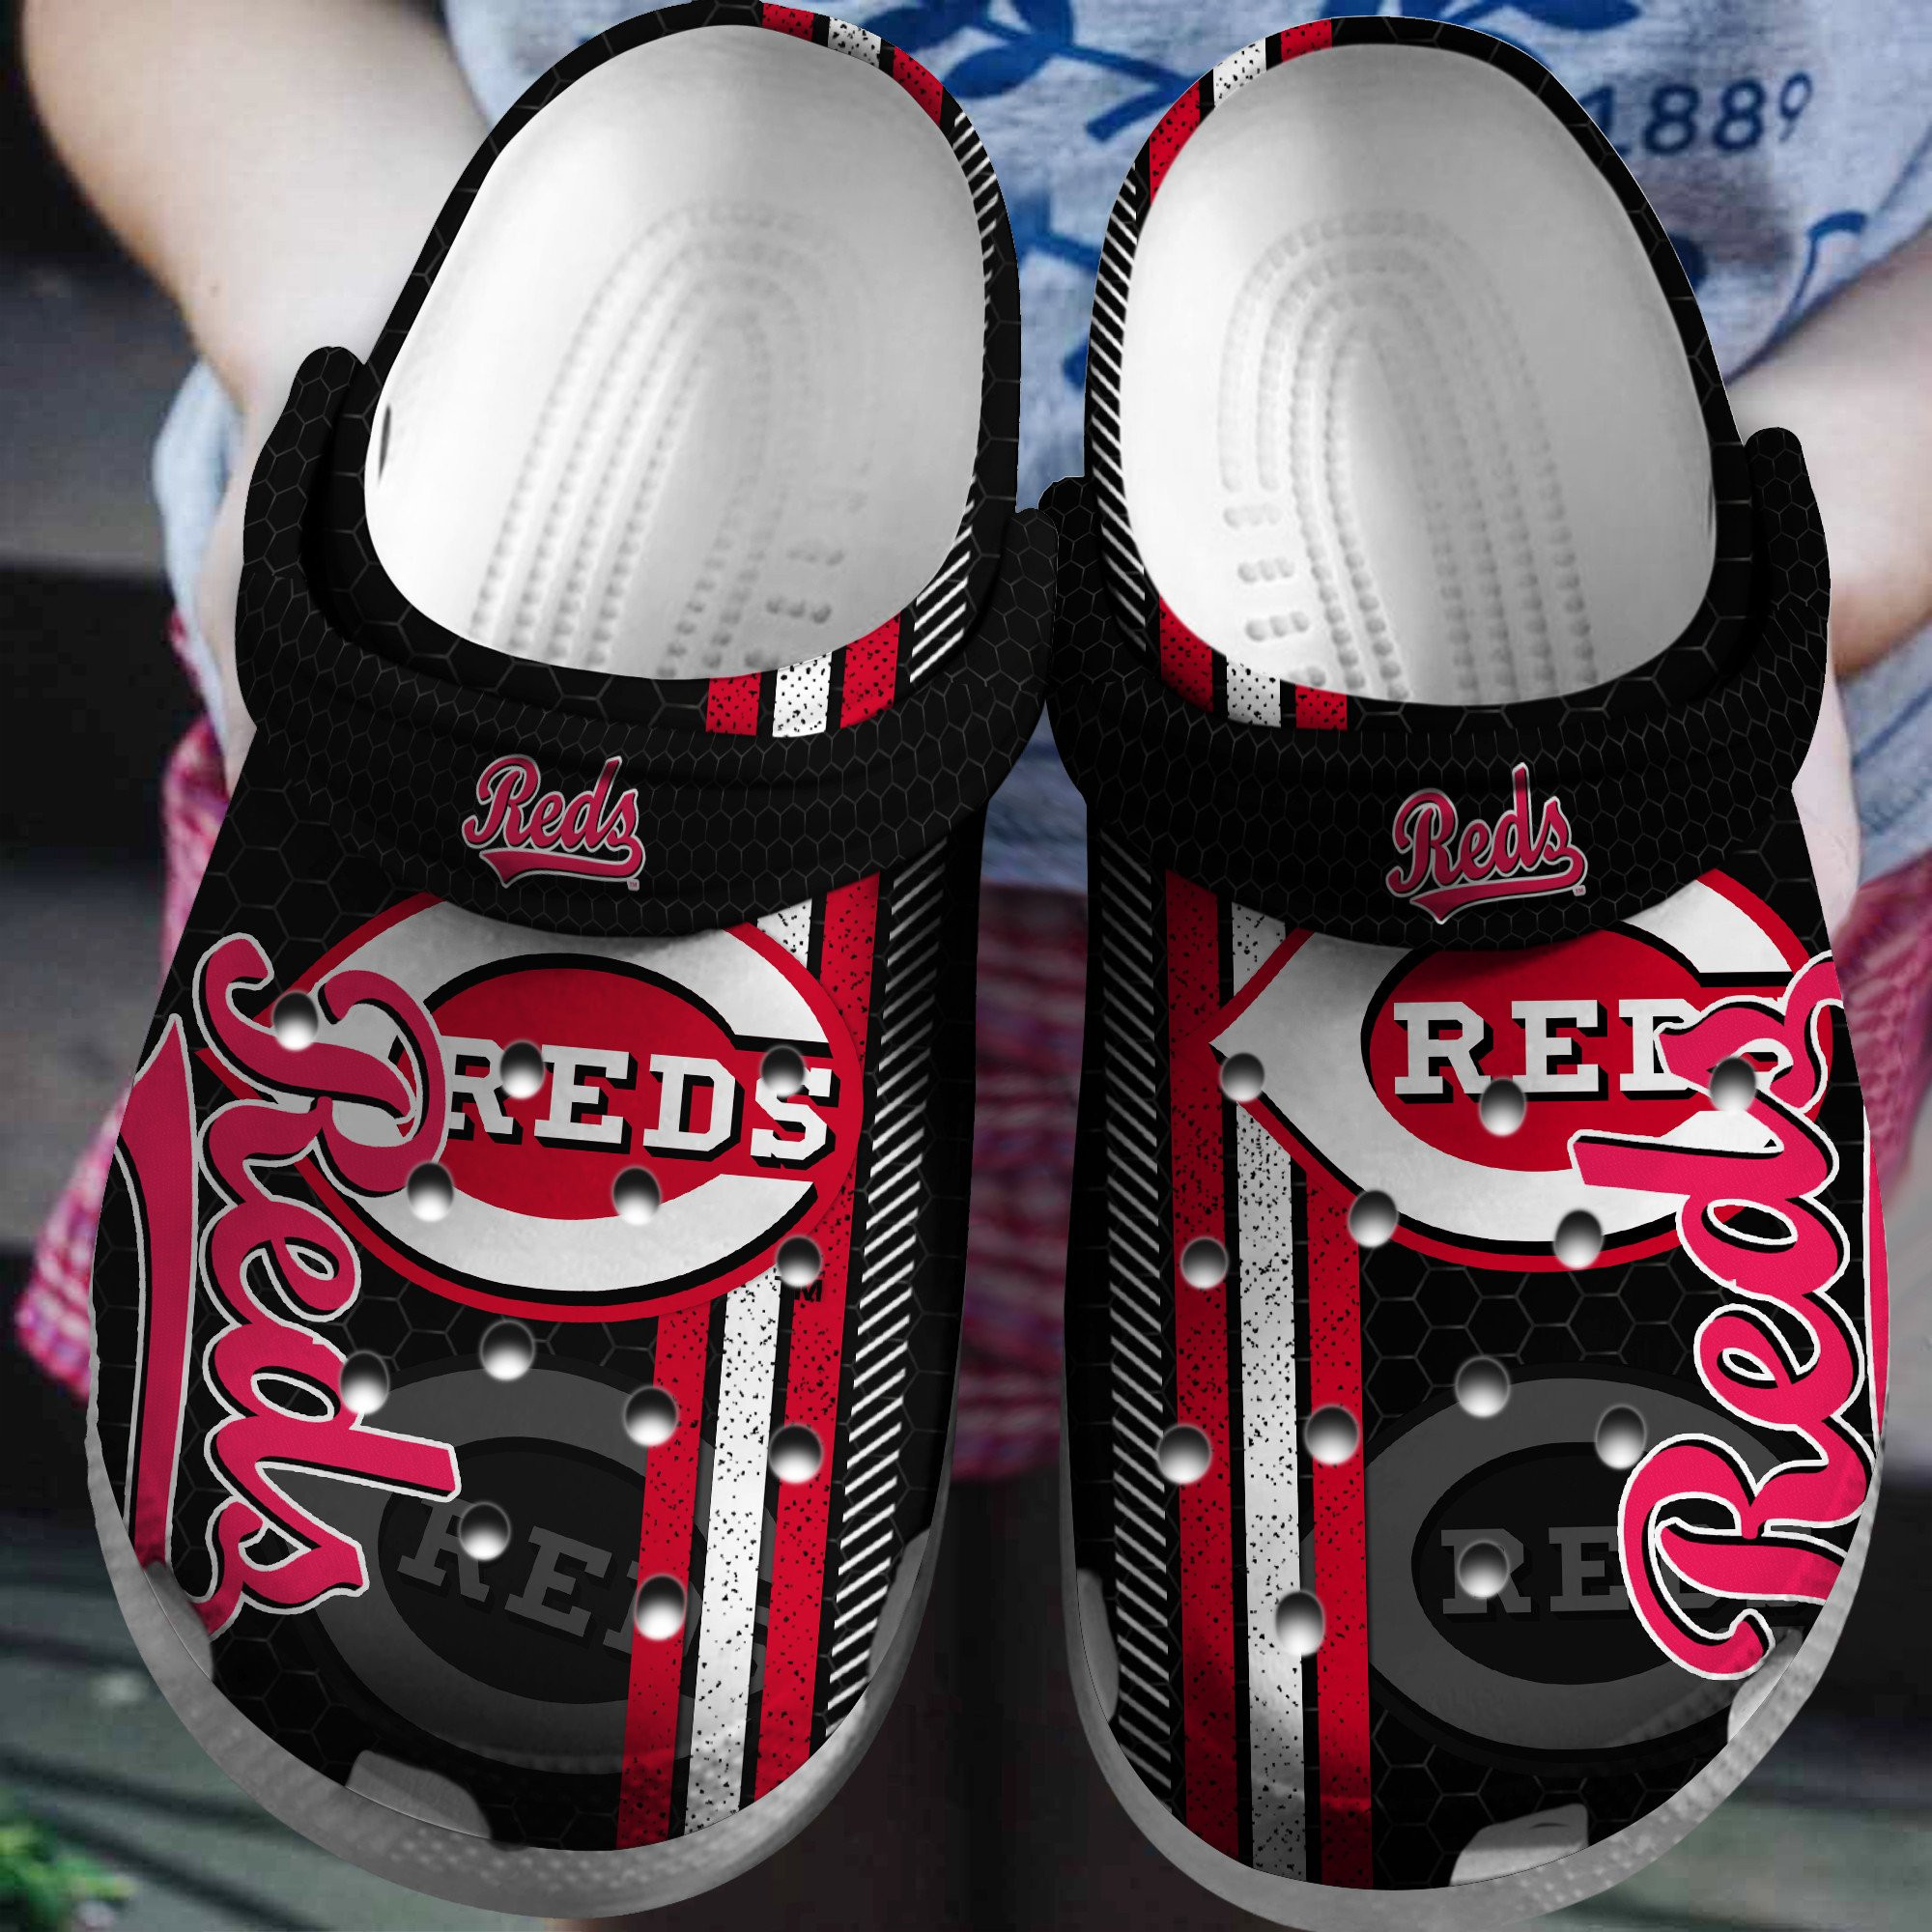 Hot Mlb Team Cincinnati Reds Crocs Clog Shoesshoes Trusted Shopping Online In The World